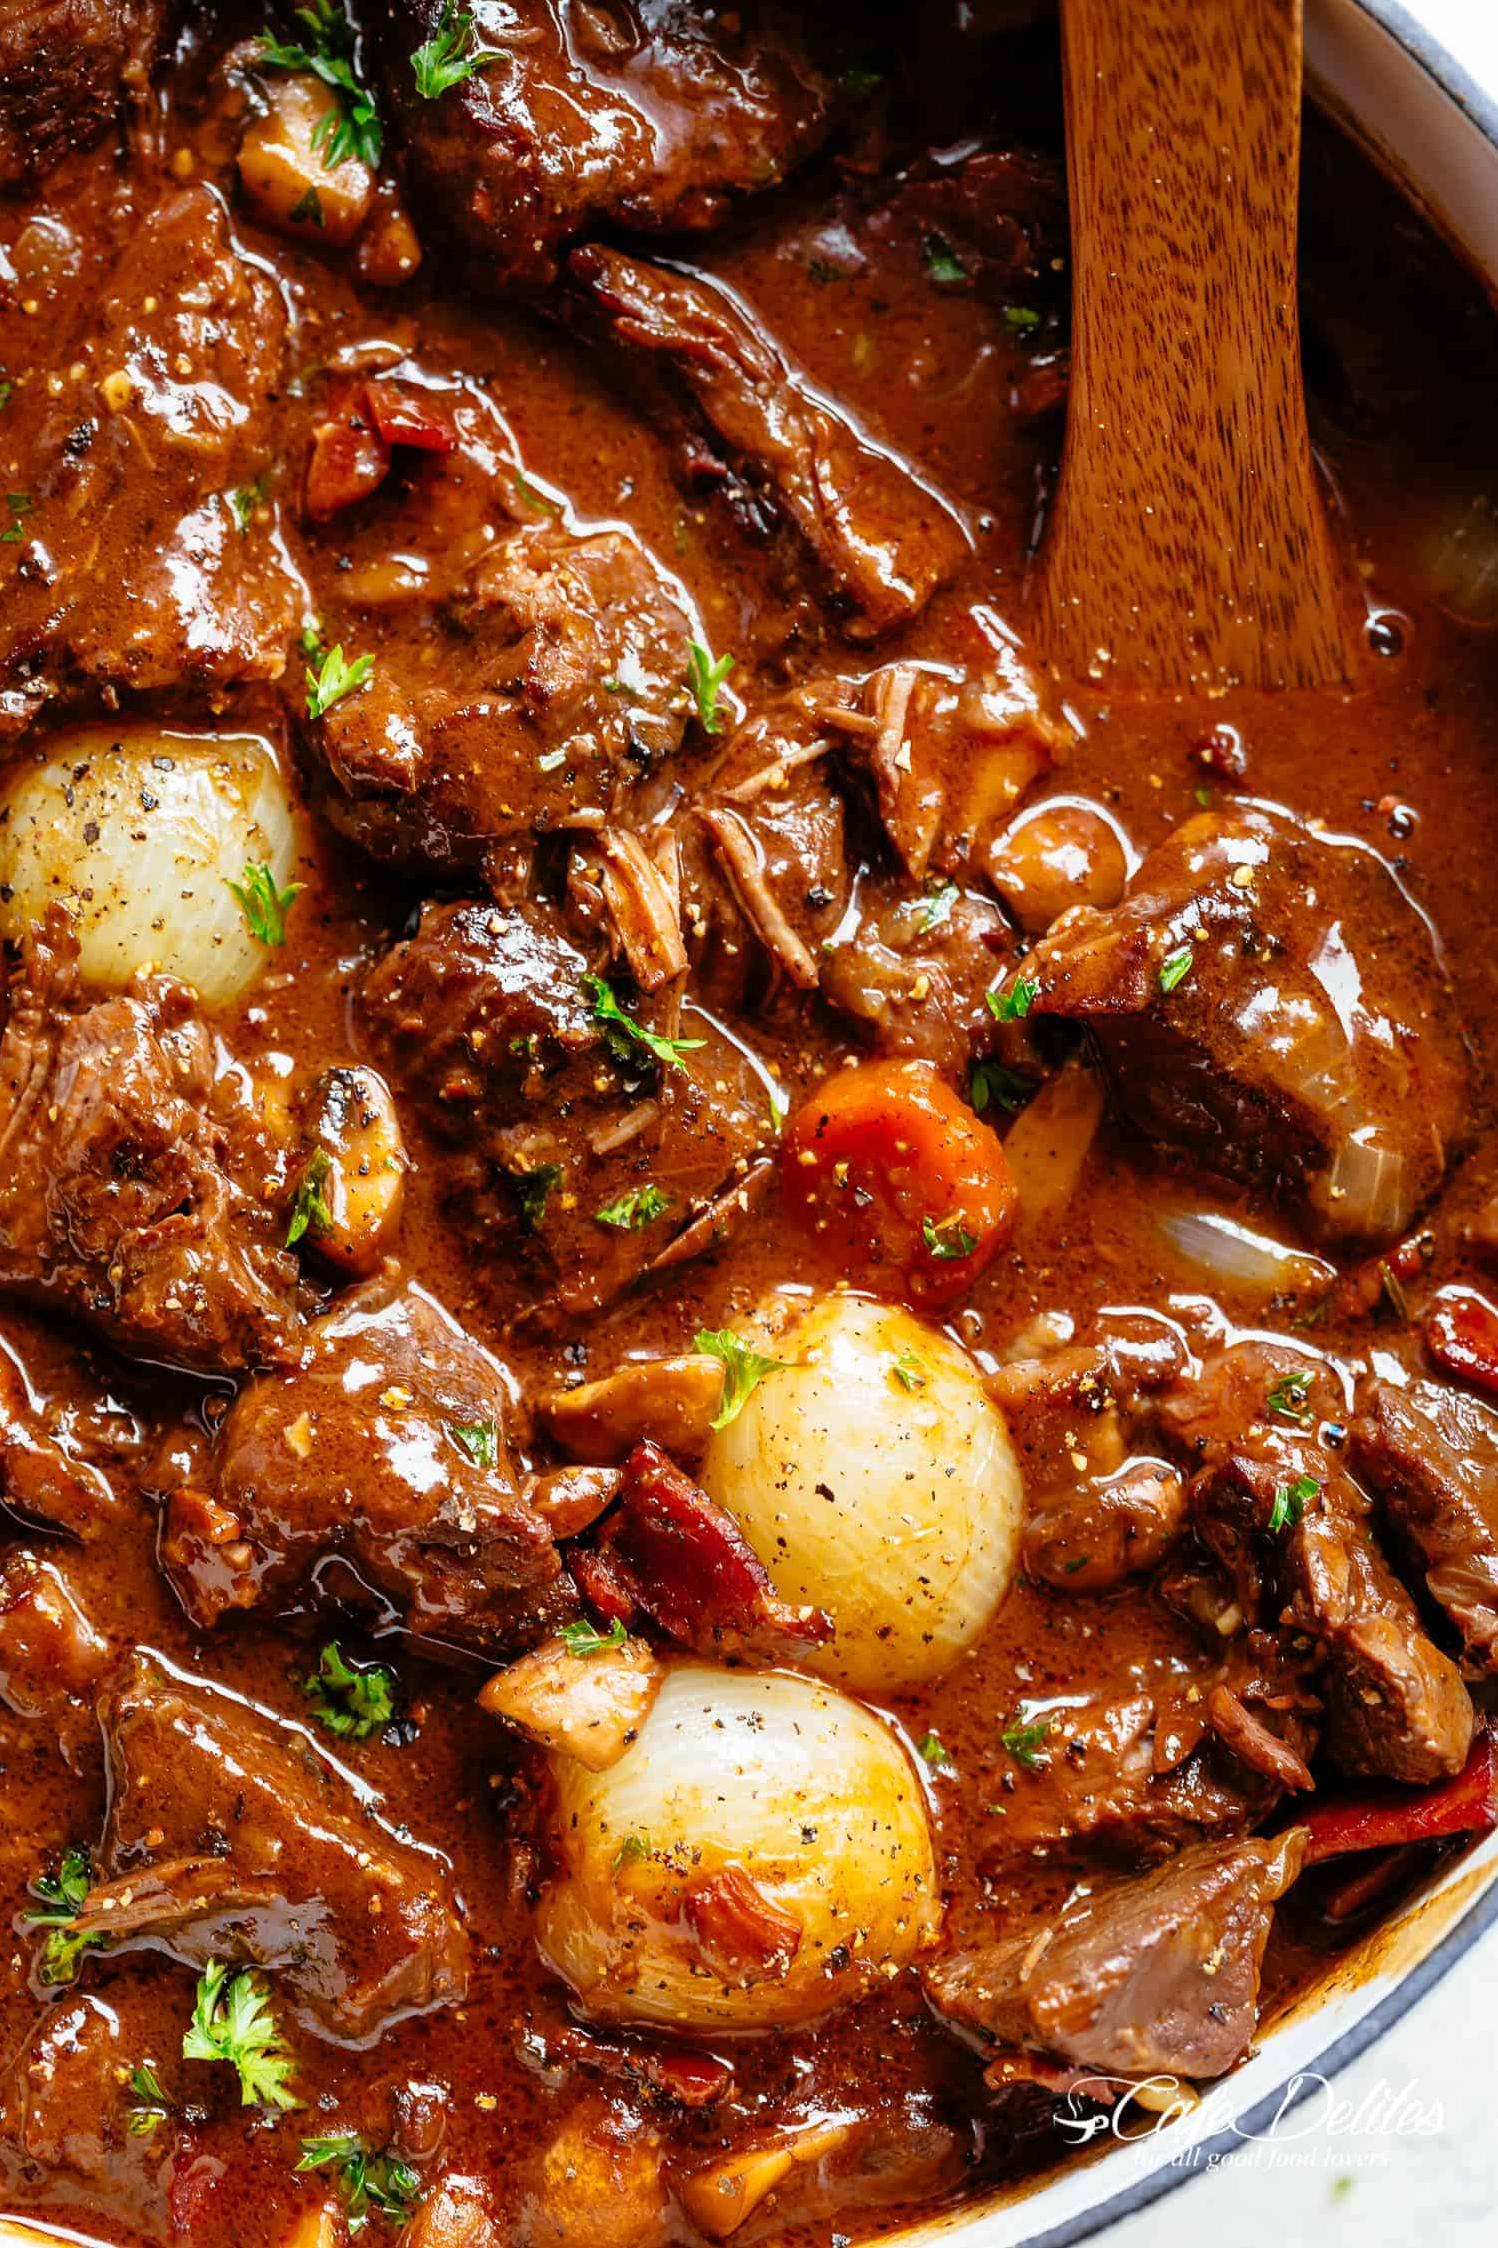  Step up your dinner game with our Beef with Red Wine Gravy.